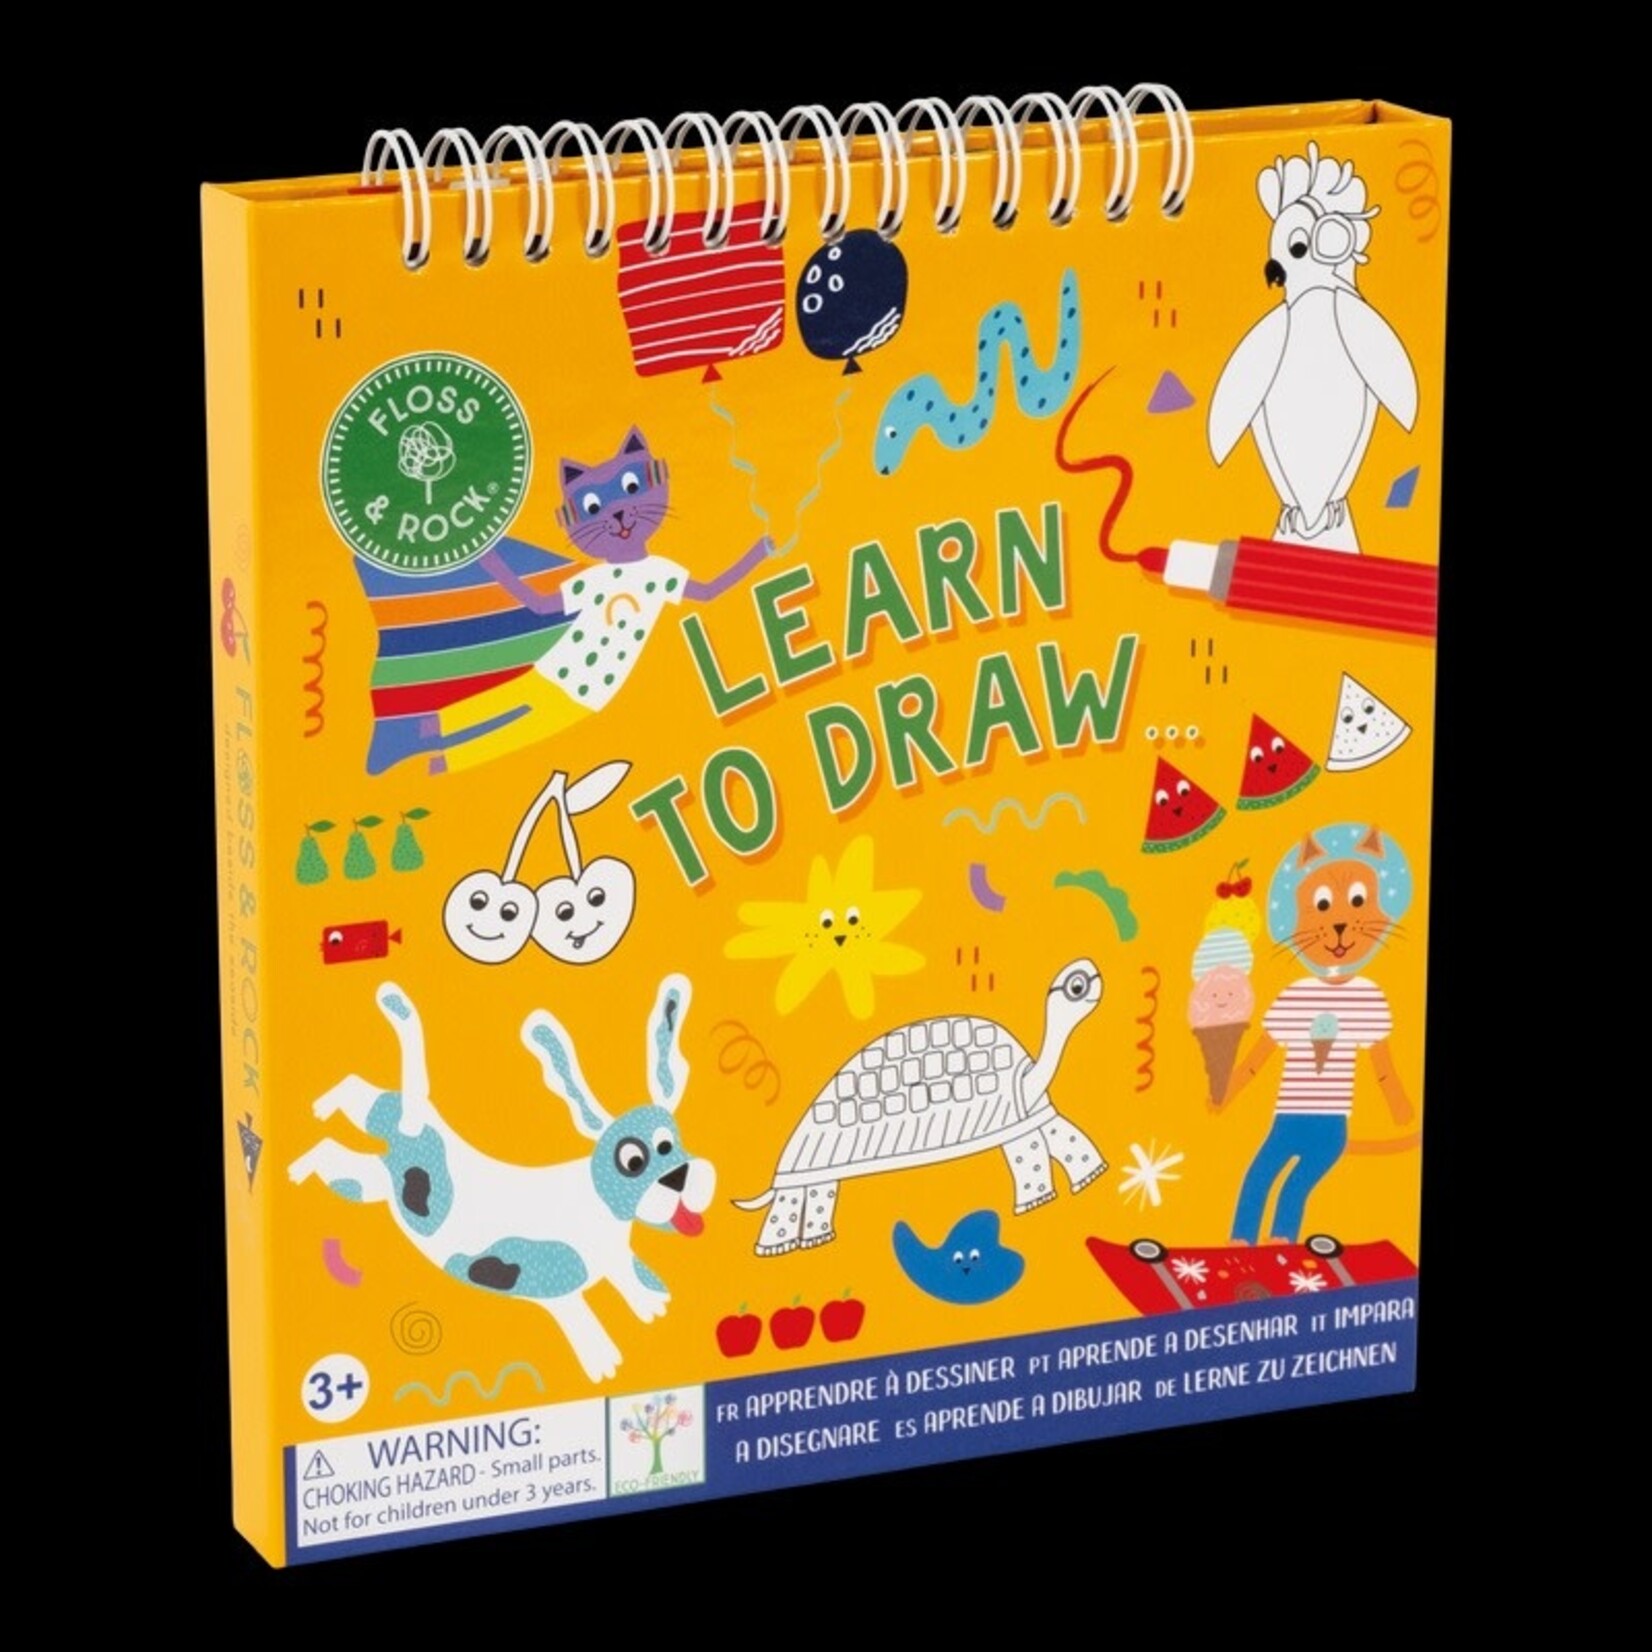 Floss & Rock Learn to Draw